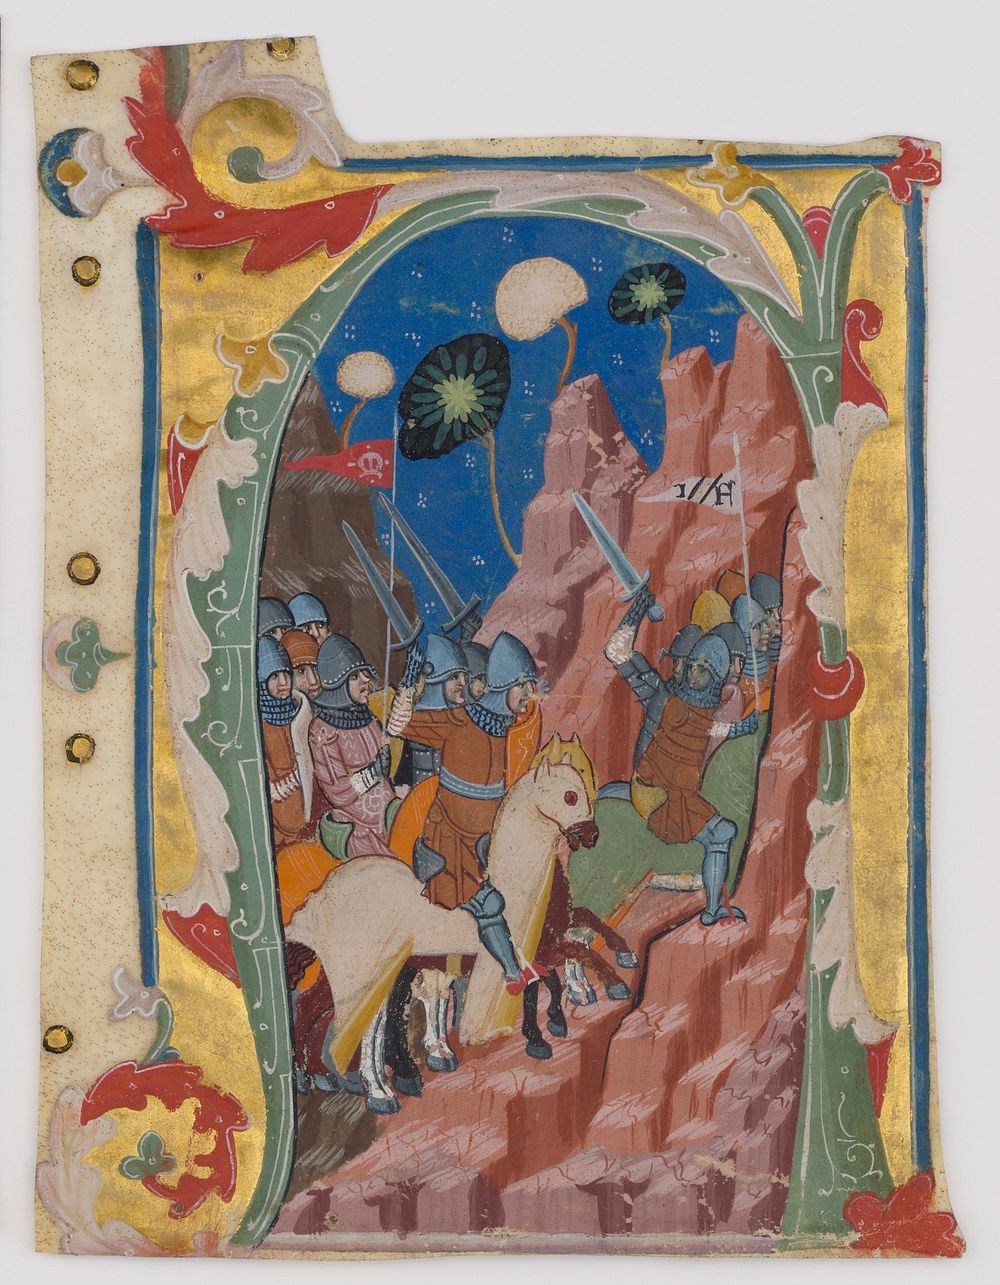 Initial A with the Battle of the Maccabees, Italian